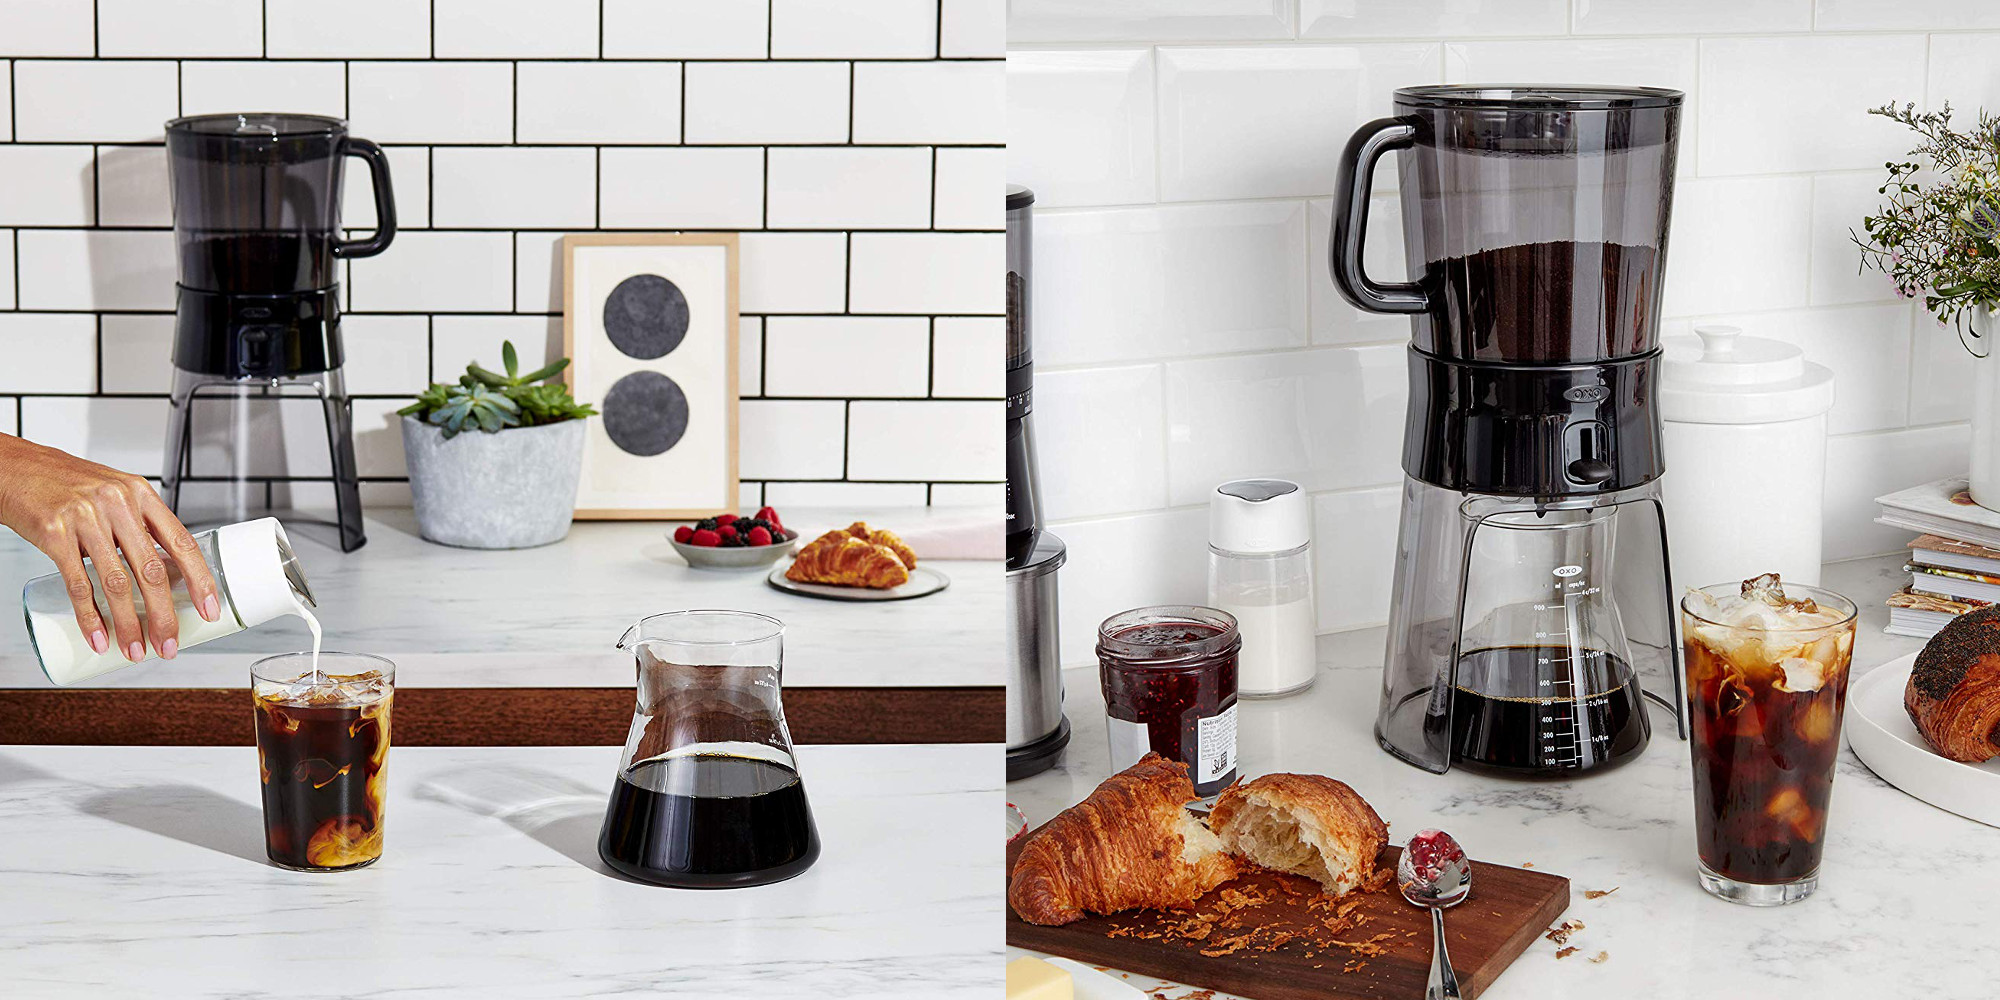 https://9to5toys.com/wp-content/uploads/sites/5/2019/07/OXO-Good-Grips-Cold-Brew-Coffee-Maker.jpg